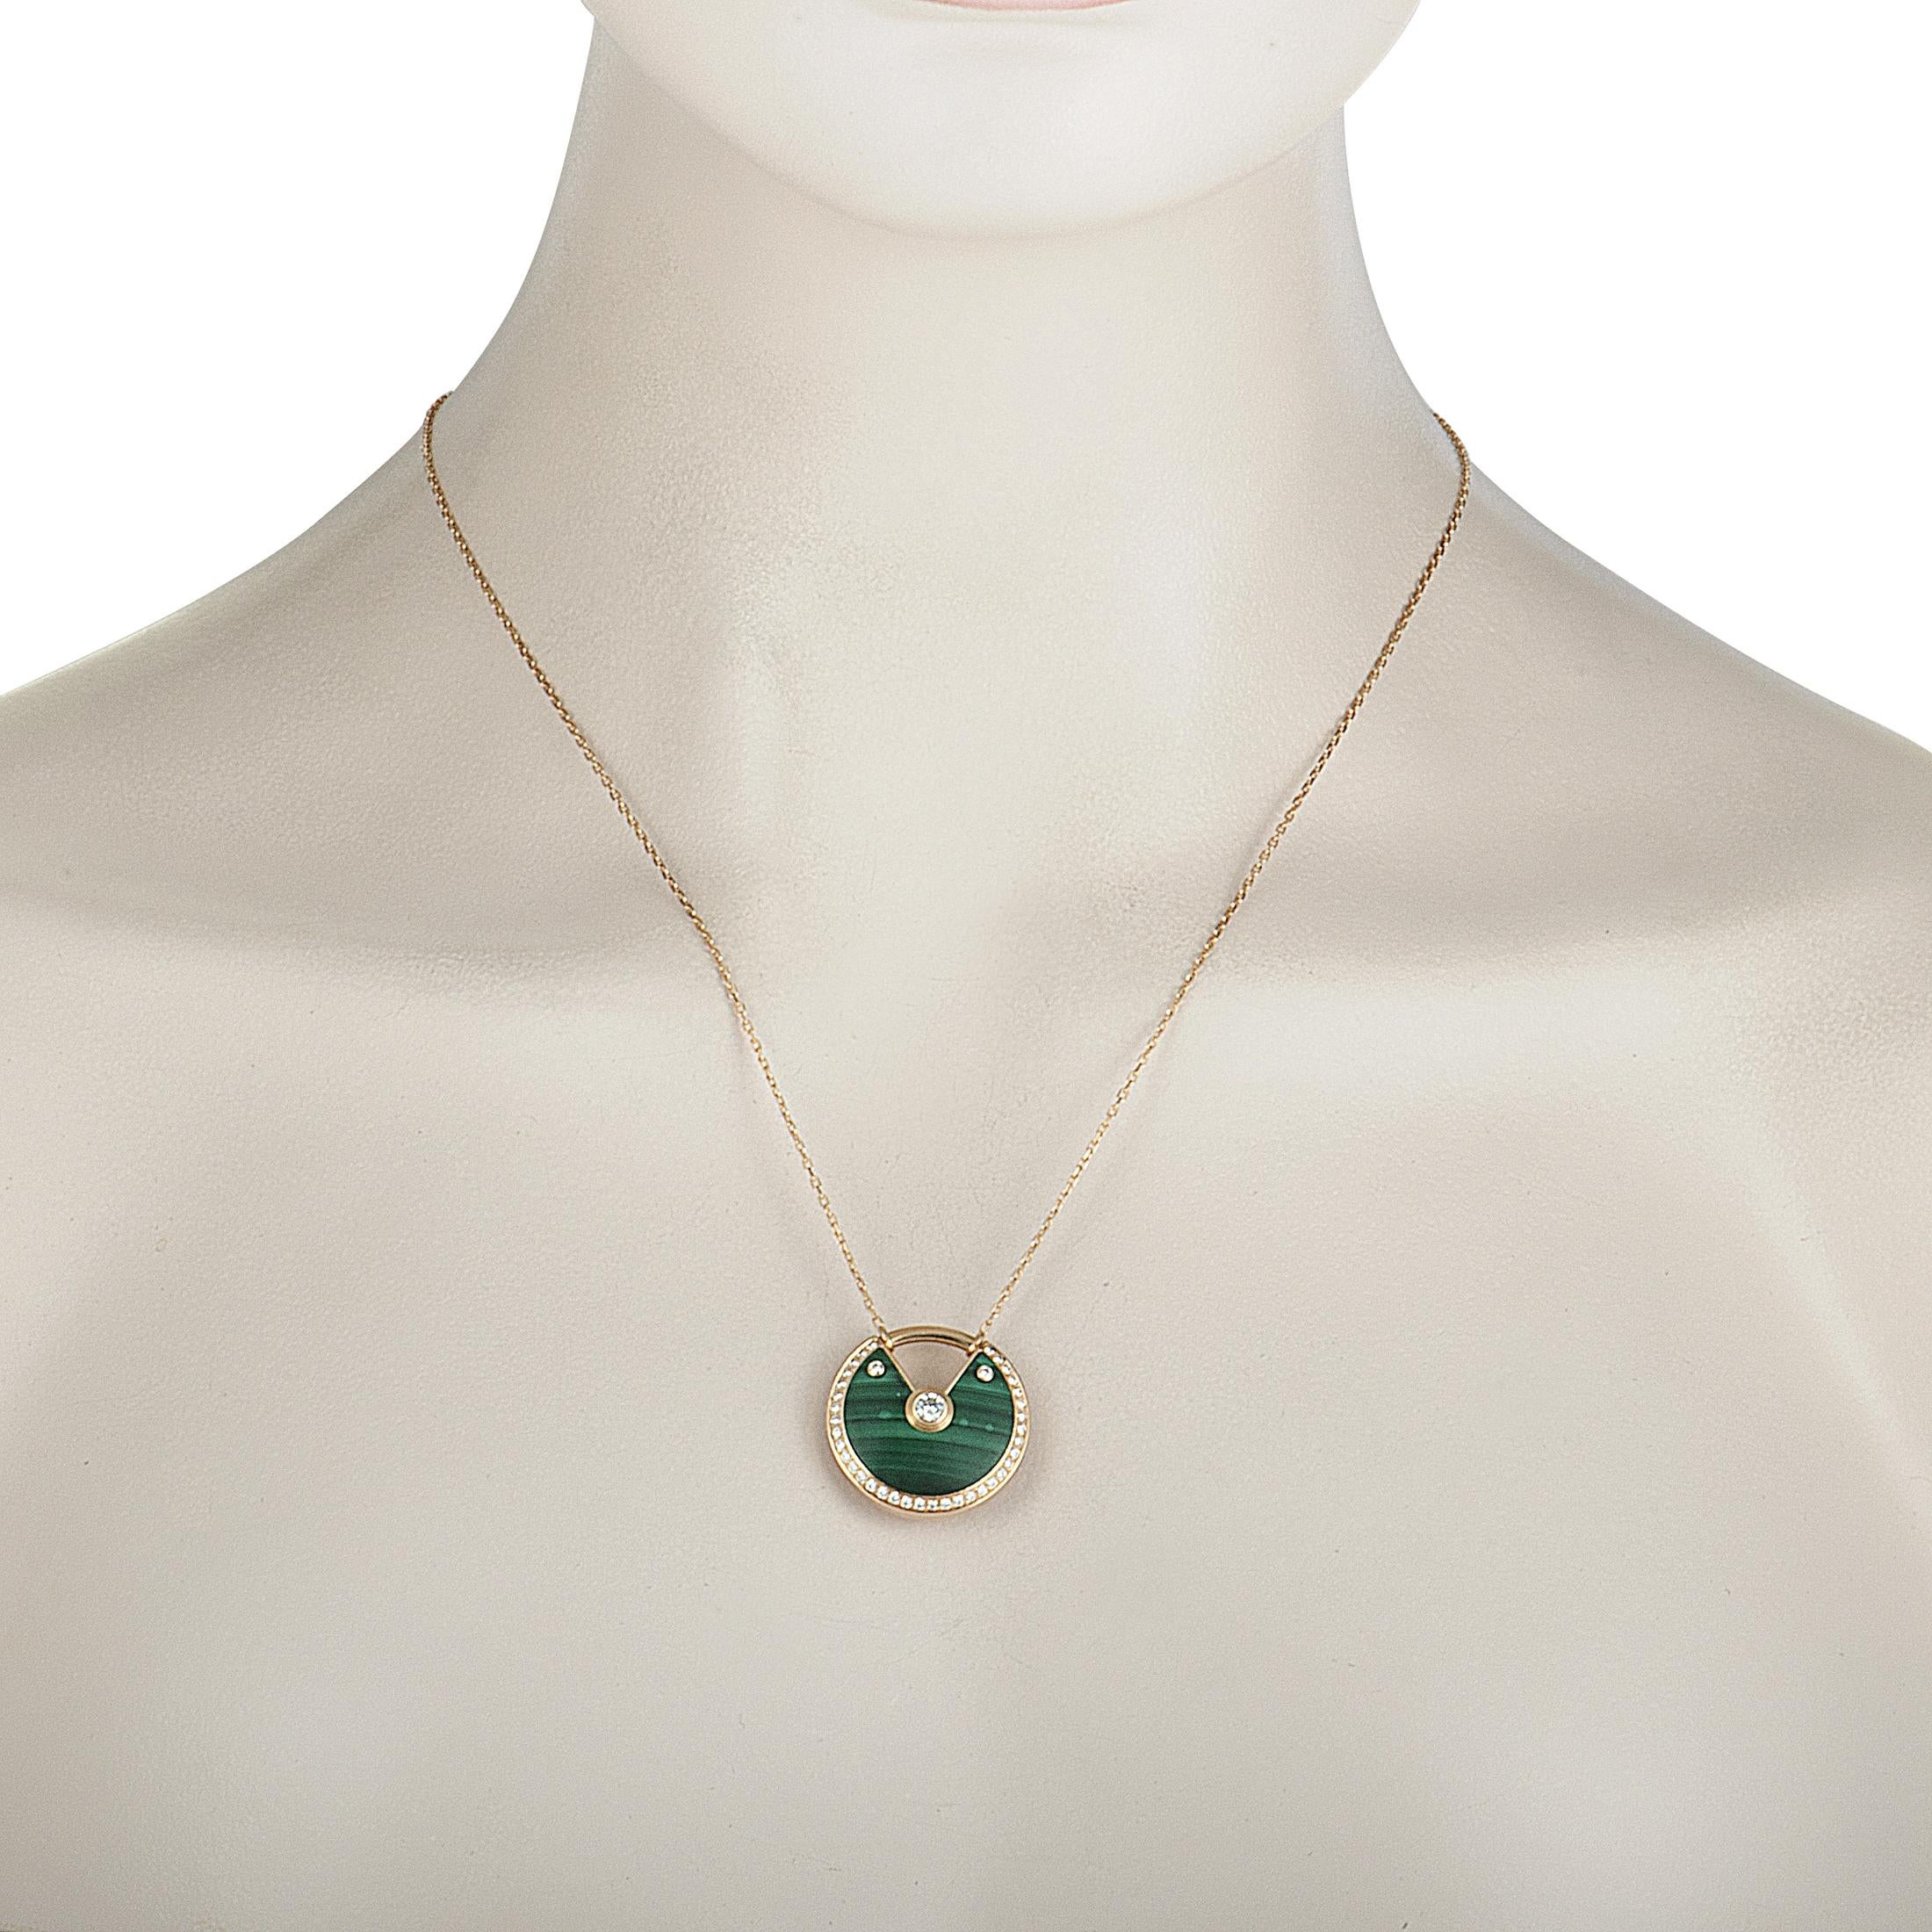 A gorgeous piece from Cartier’s exquisite “Amulette” collection, this exceptional necklace offers a look of utmost refinement and sophistication. The necklace is made of charming 18K rose gold and it is decorated with stunning malachite and diamond